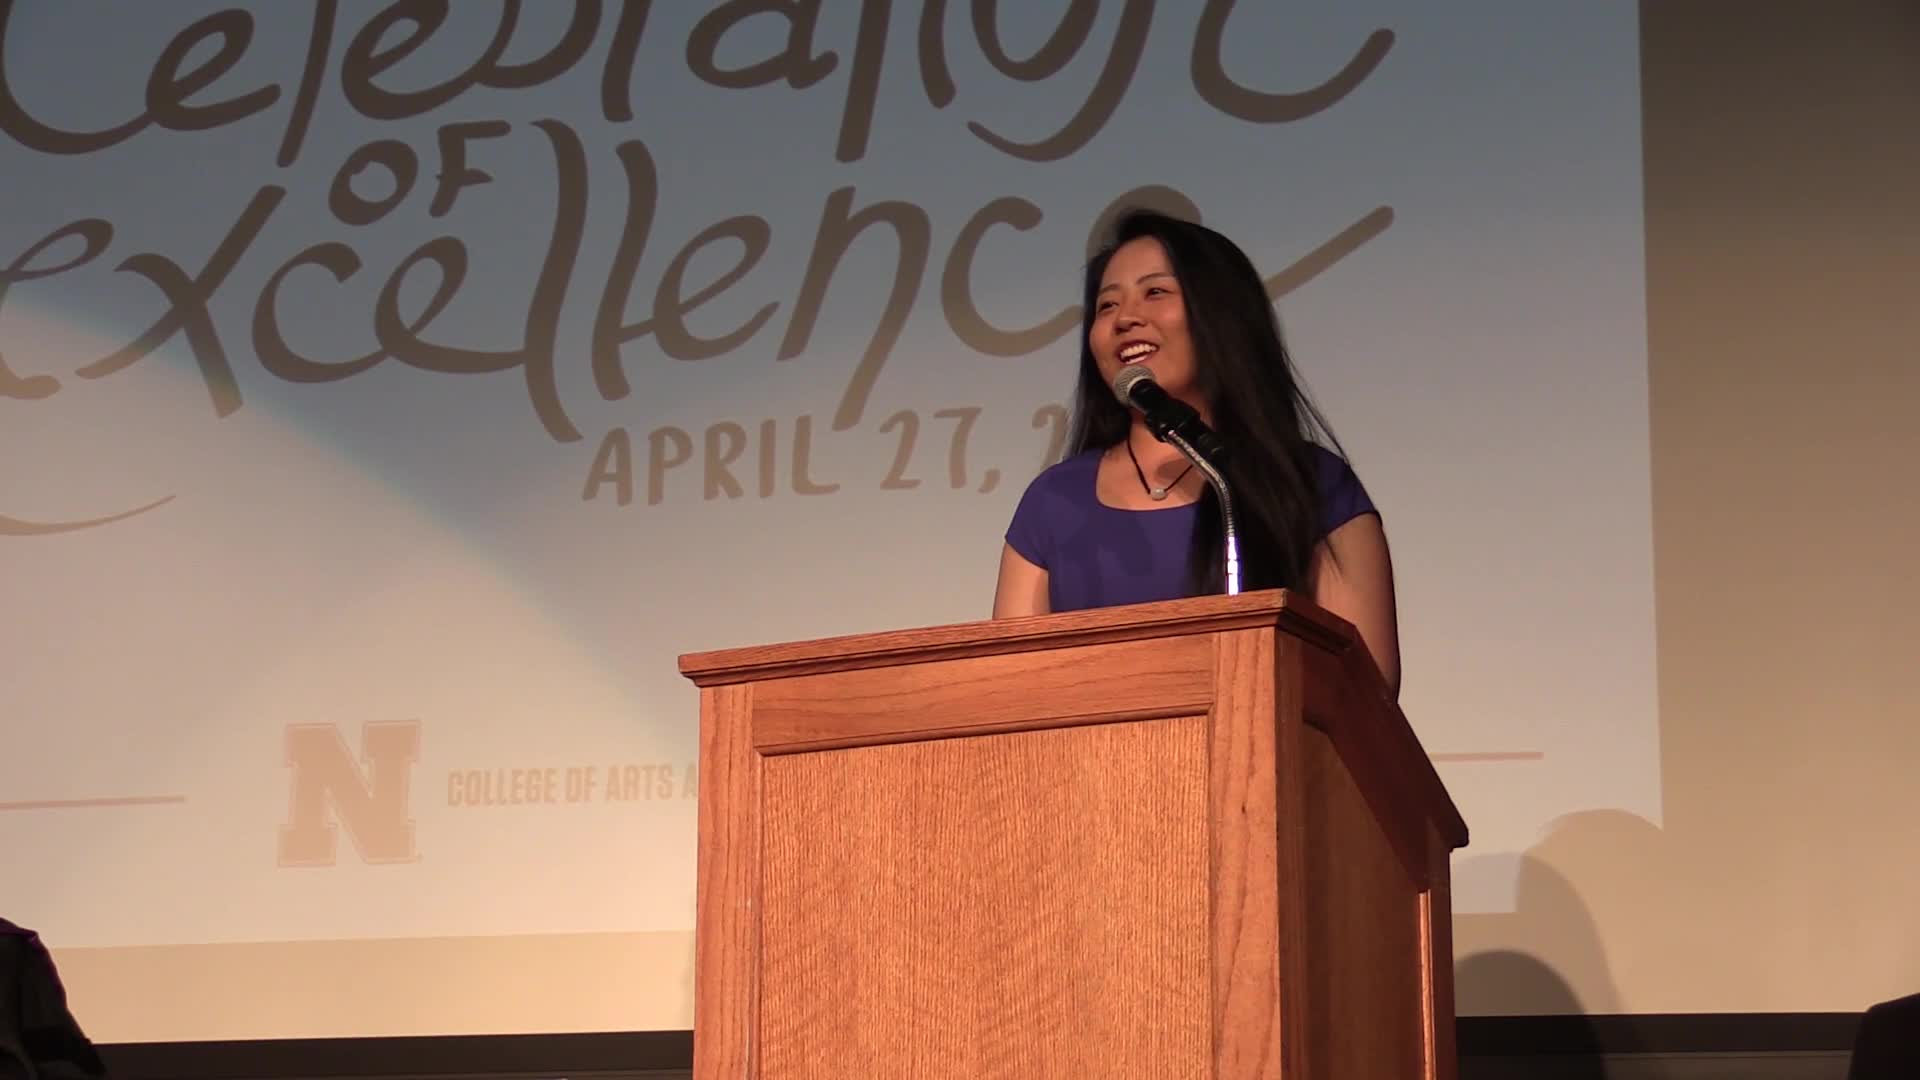 Xinyue Wang's senior reflection at Celebration of Excellence 2018